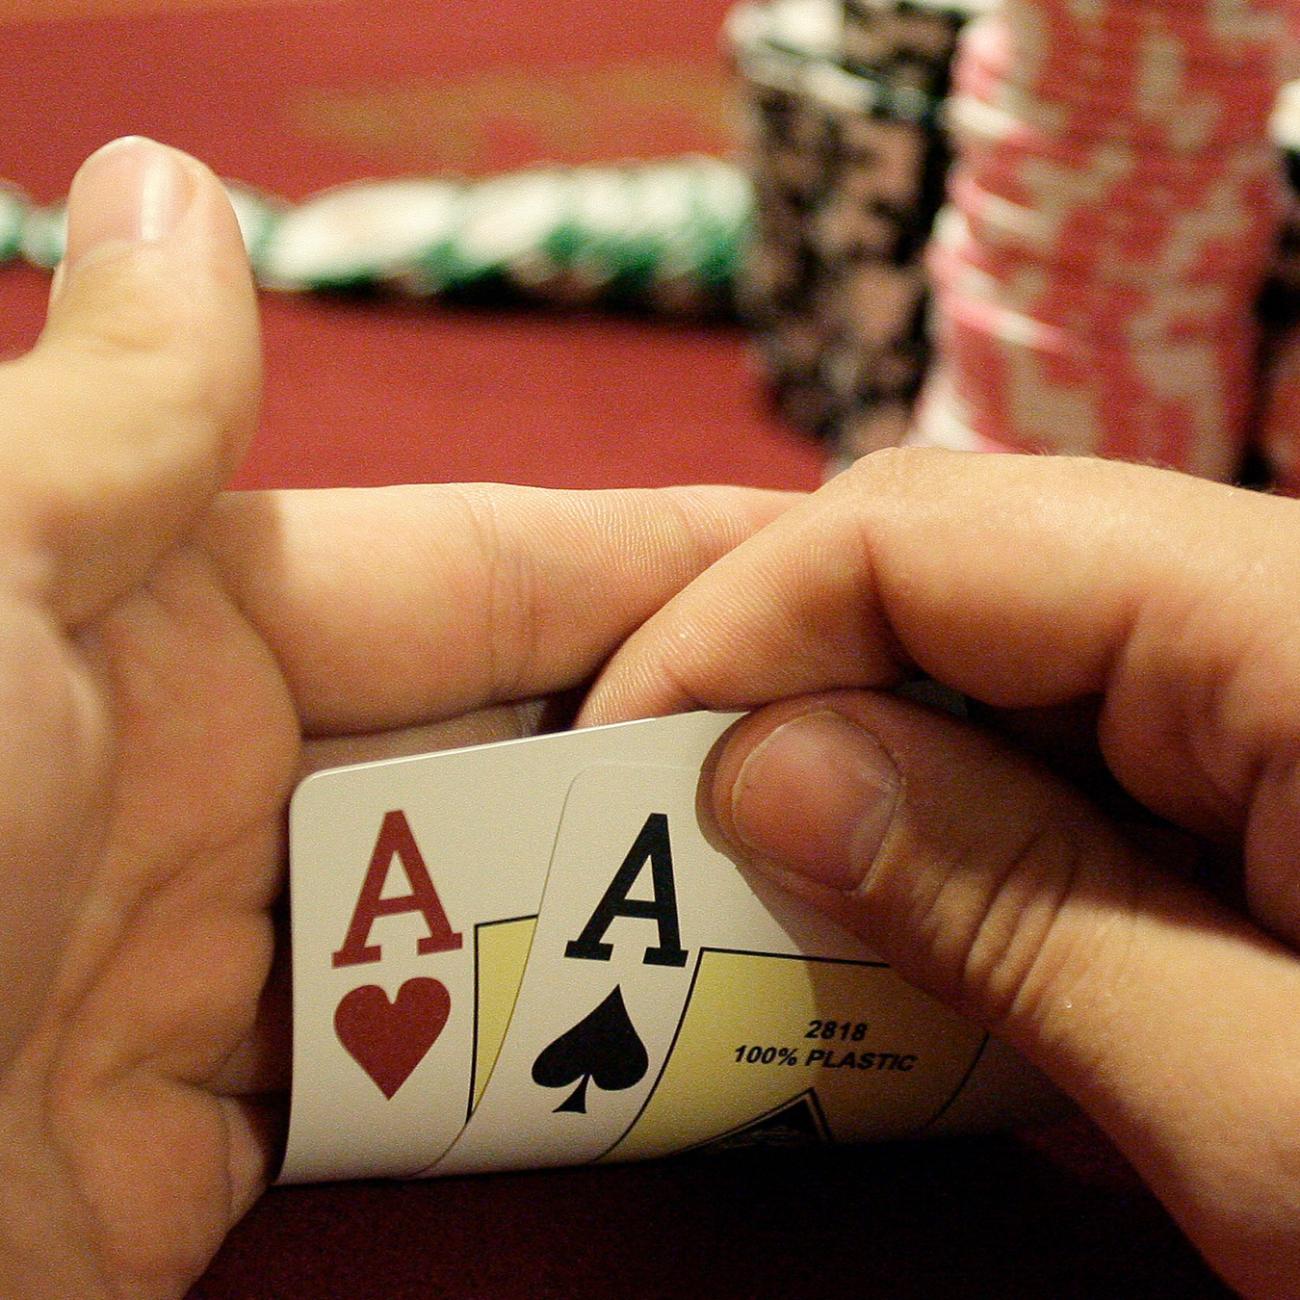 A player checks his cards during the finals of the Russian Masters Poker Cup at the Azov-City, Russia, gambling zone, south of Russia's southern city of Rostov-on-Don, on September 23, 2010. Photo shows a pair of hands holding up the corners of two cards to reveal a pair of aces. A large stack of chips is in the background. REUTERS/Vladimir Konstantinov 